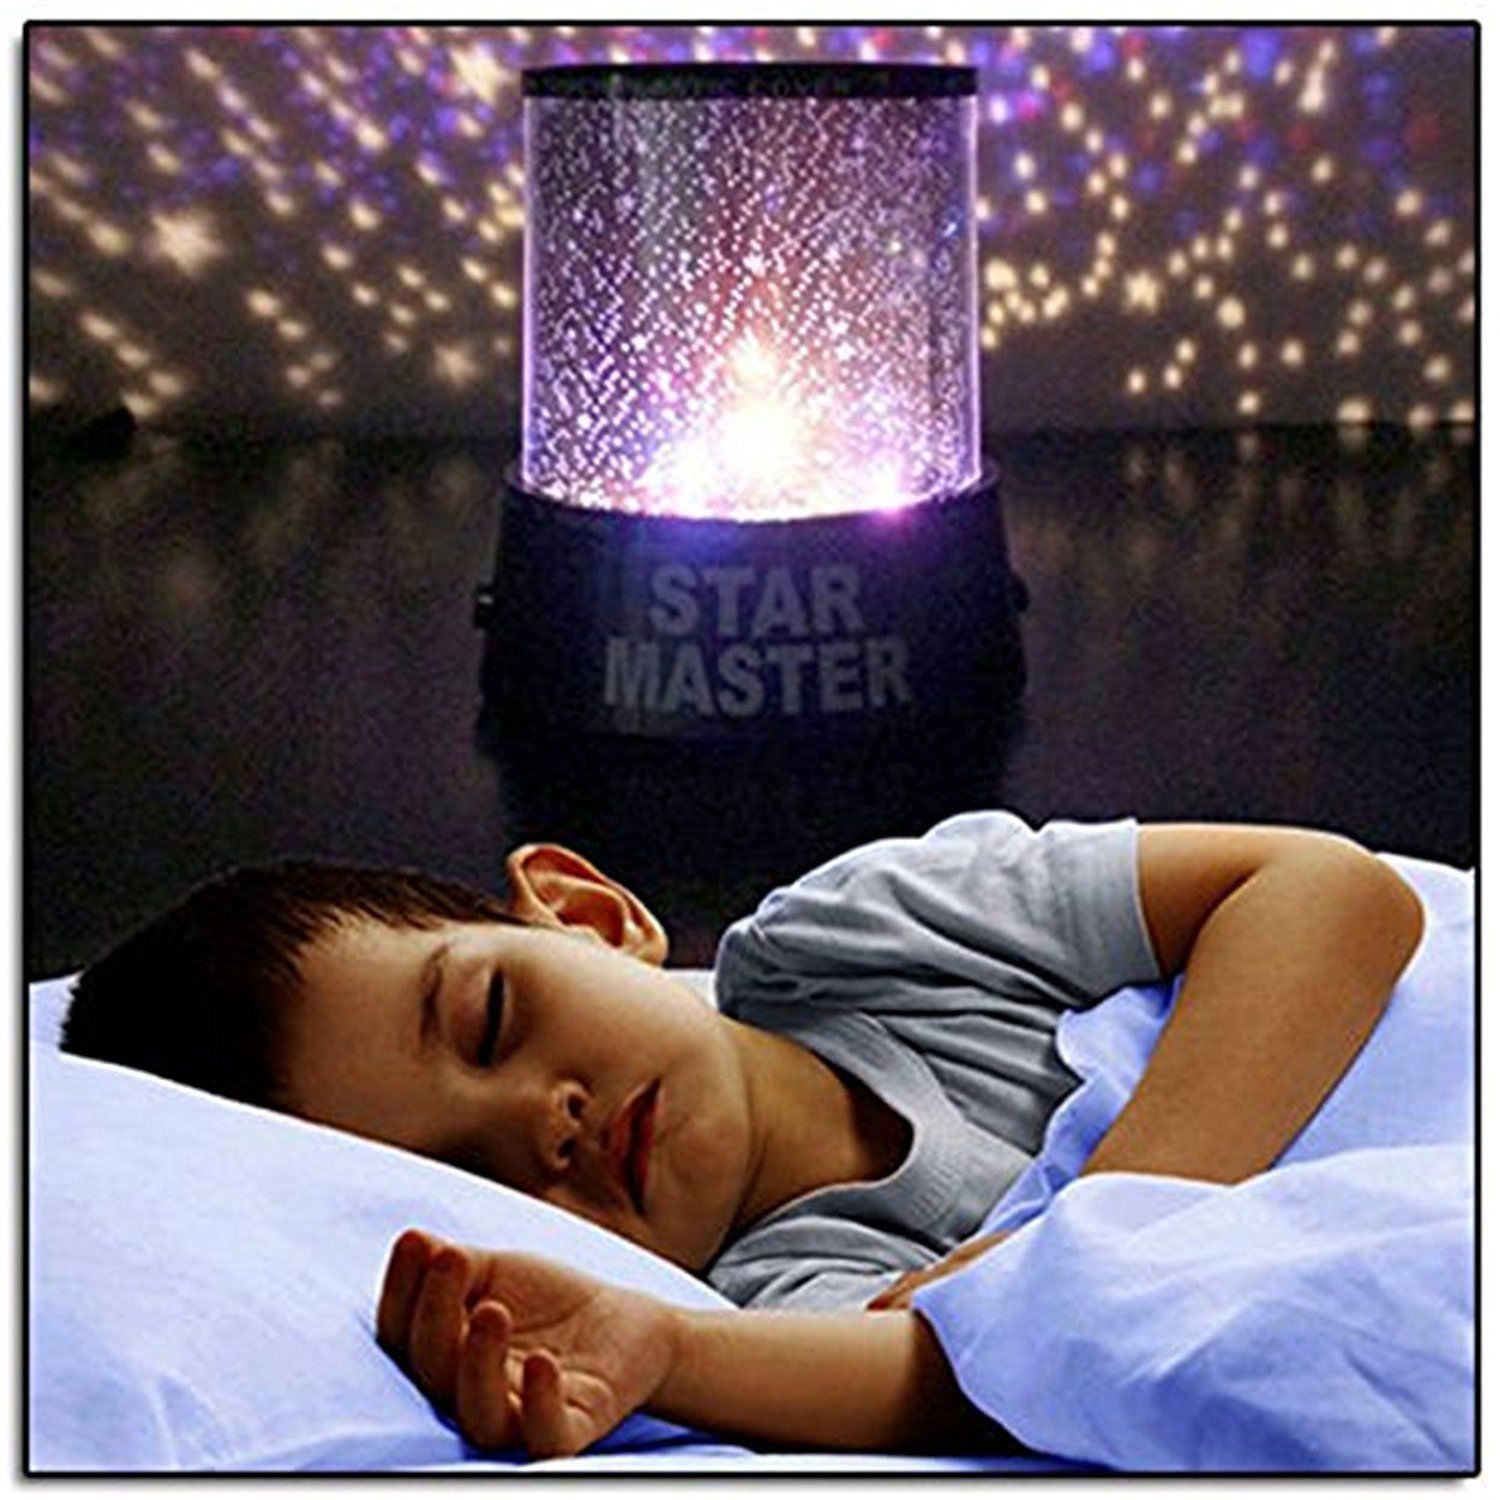     			Kanha Star Master Projector Night Lamp With USB Charging Multicolour - Pack of 1